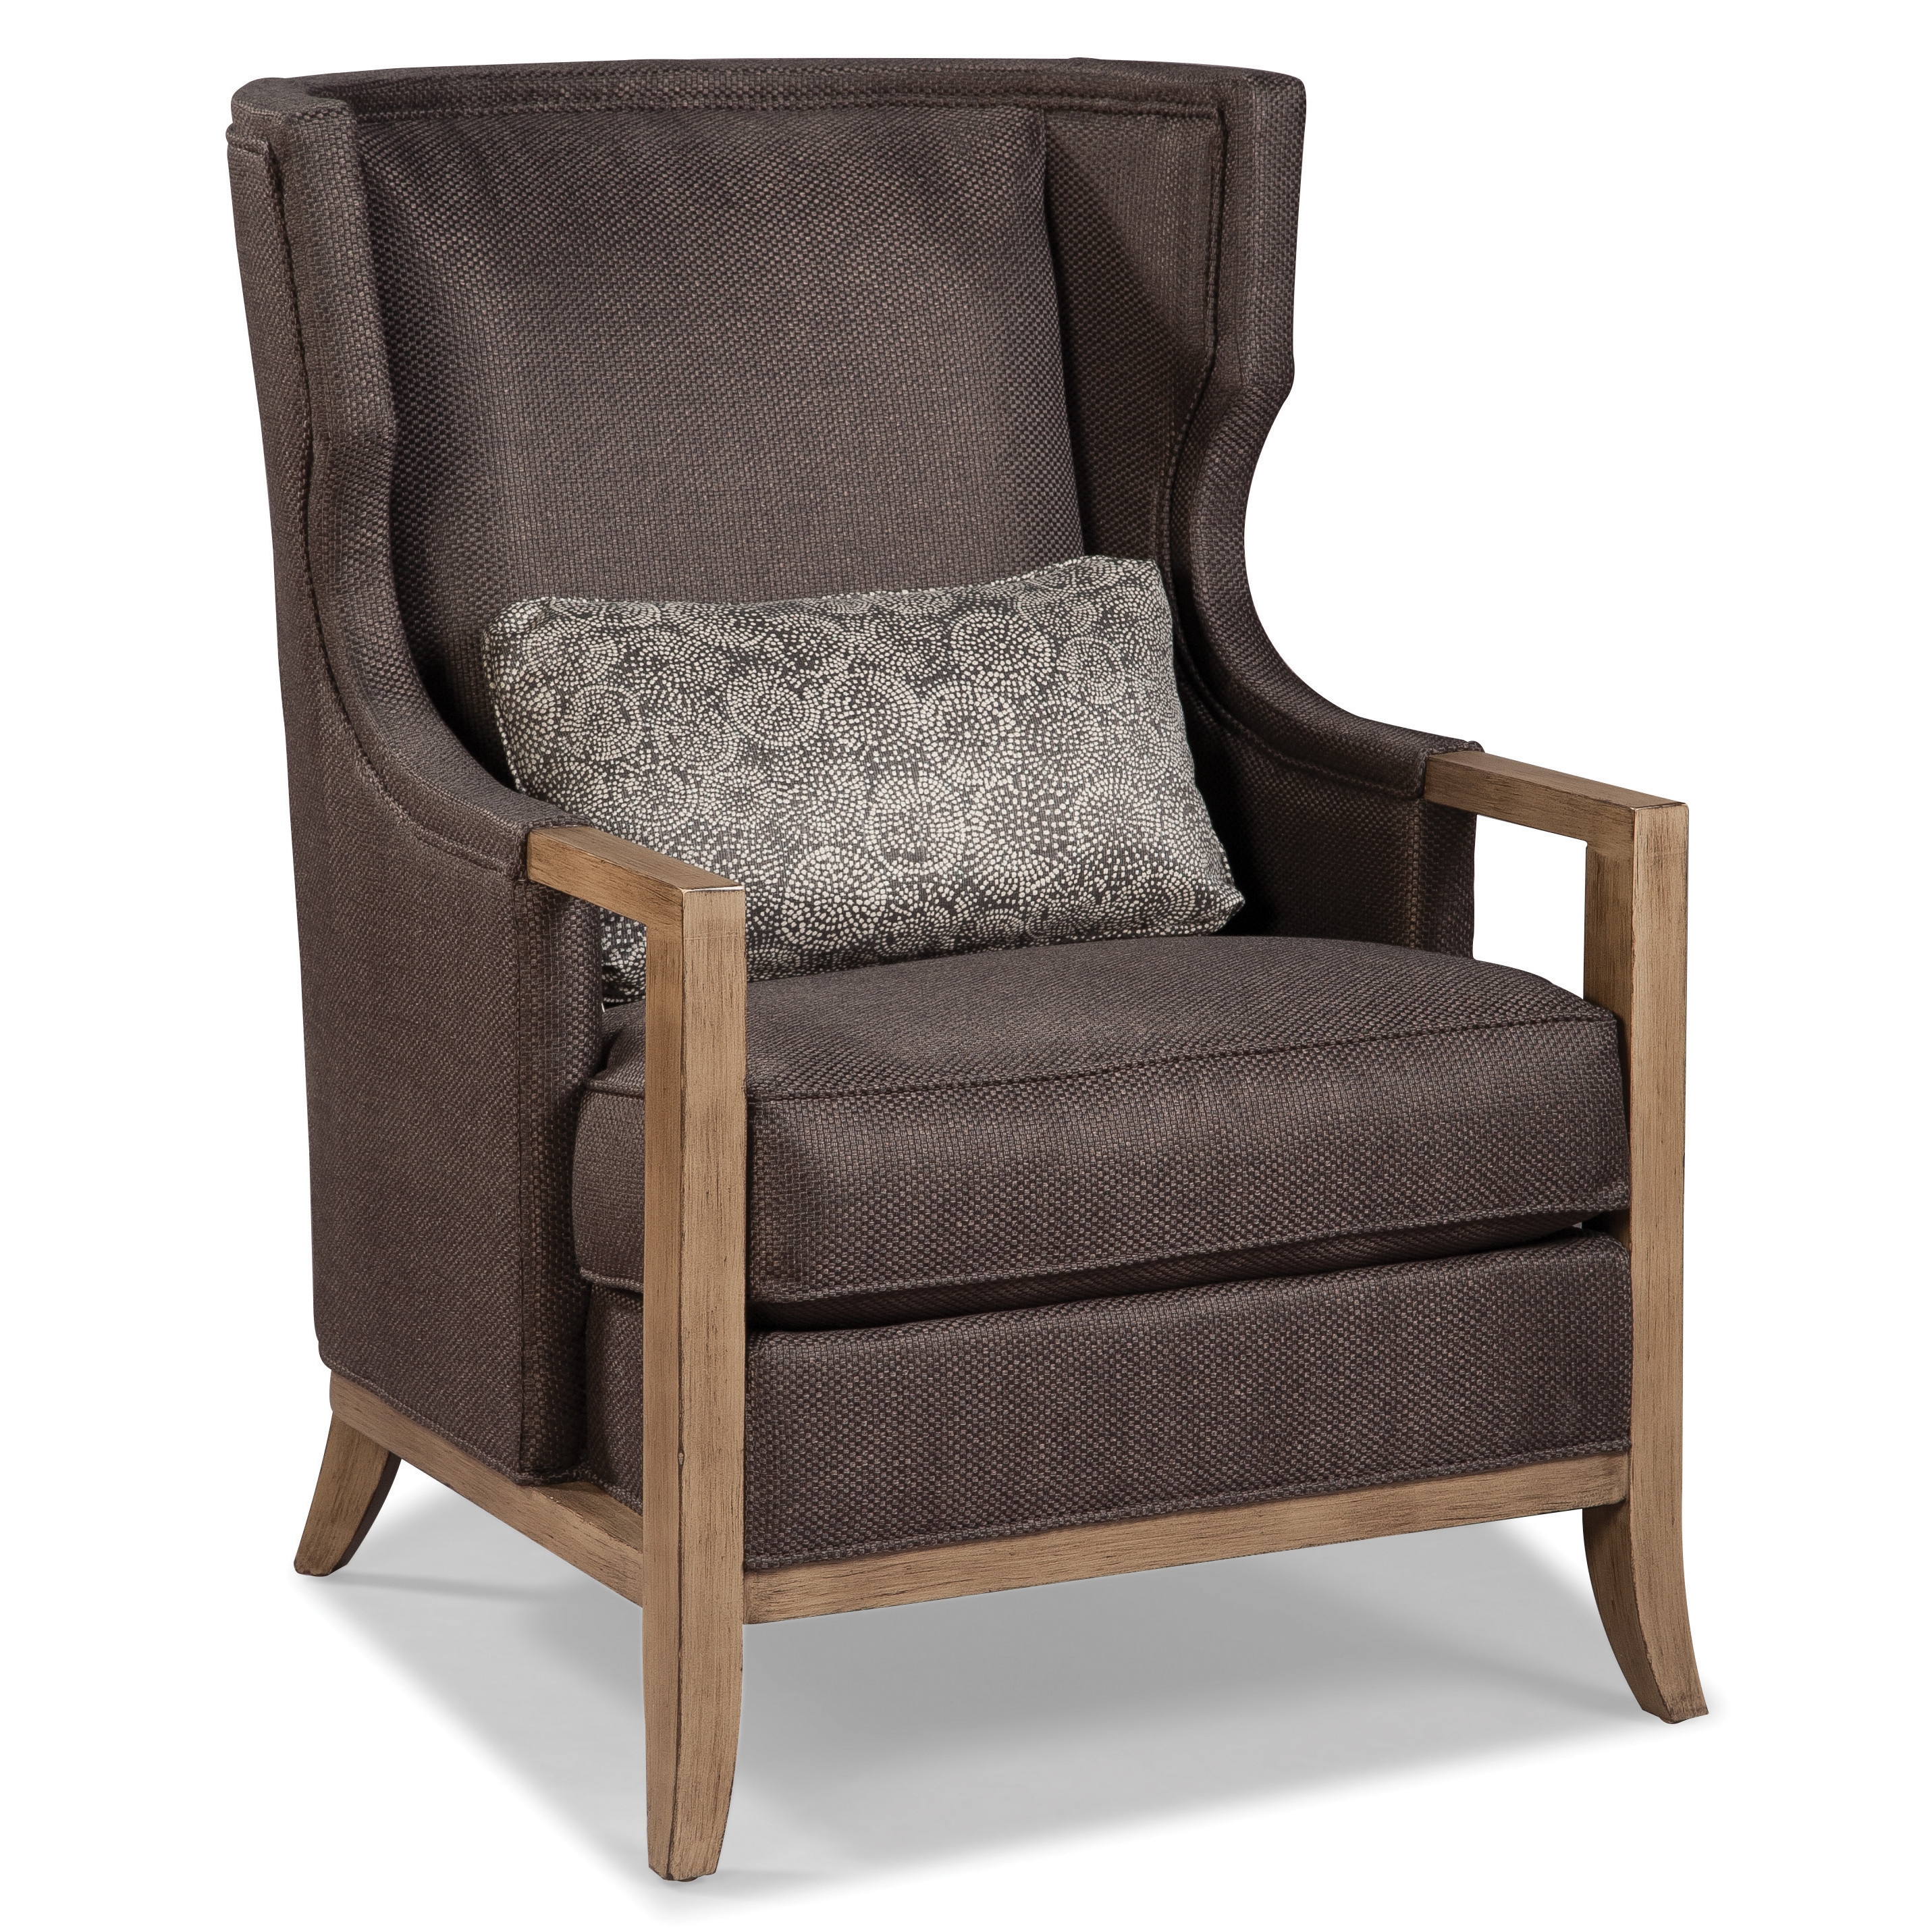 Wood Trimmed Transitional Wing Arm Chair - Image 0